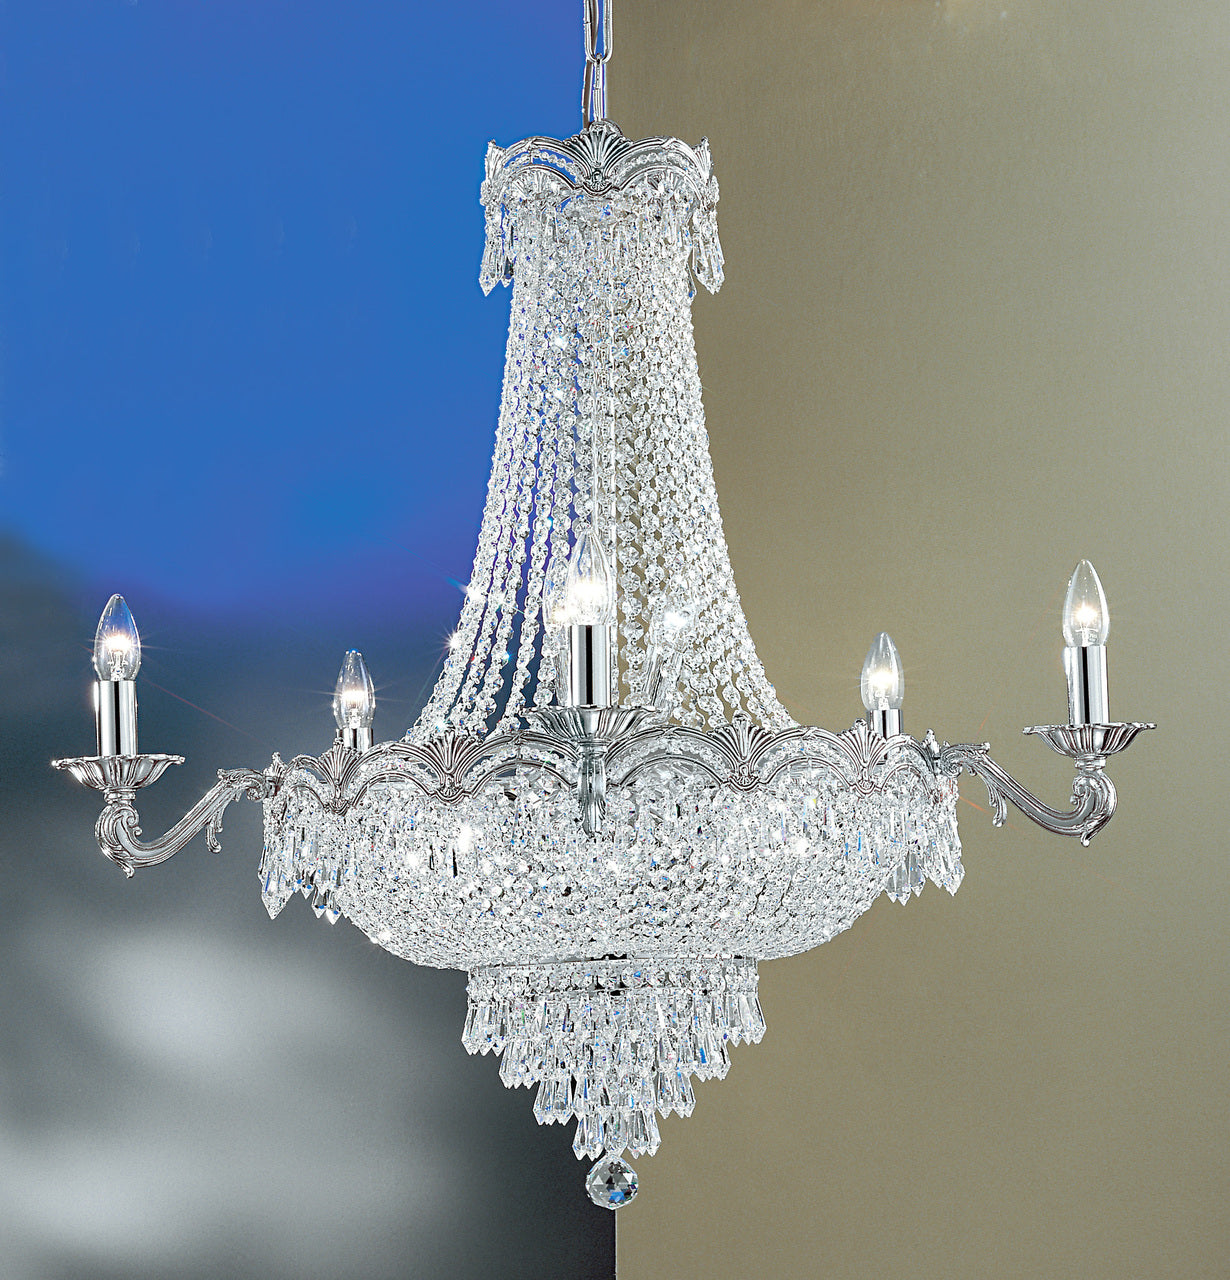 Classic Lighting 1859 CHB CP Regency II Crystal Chandelier in Chrome/Black Patina (Imported from Spain)